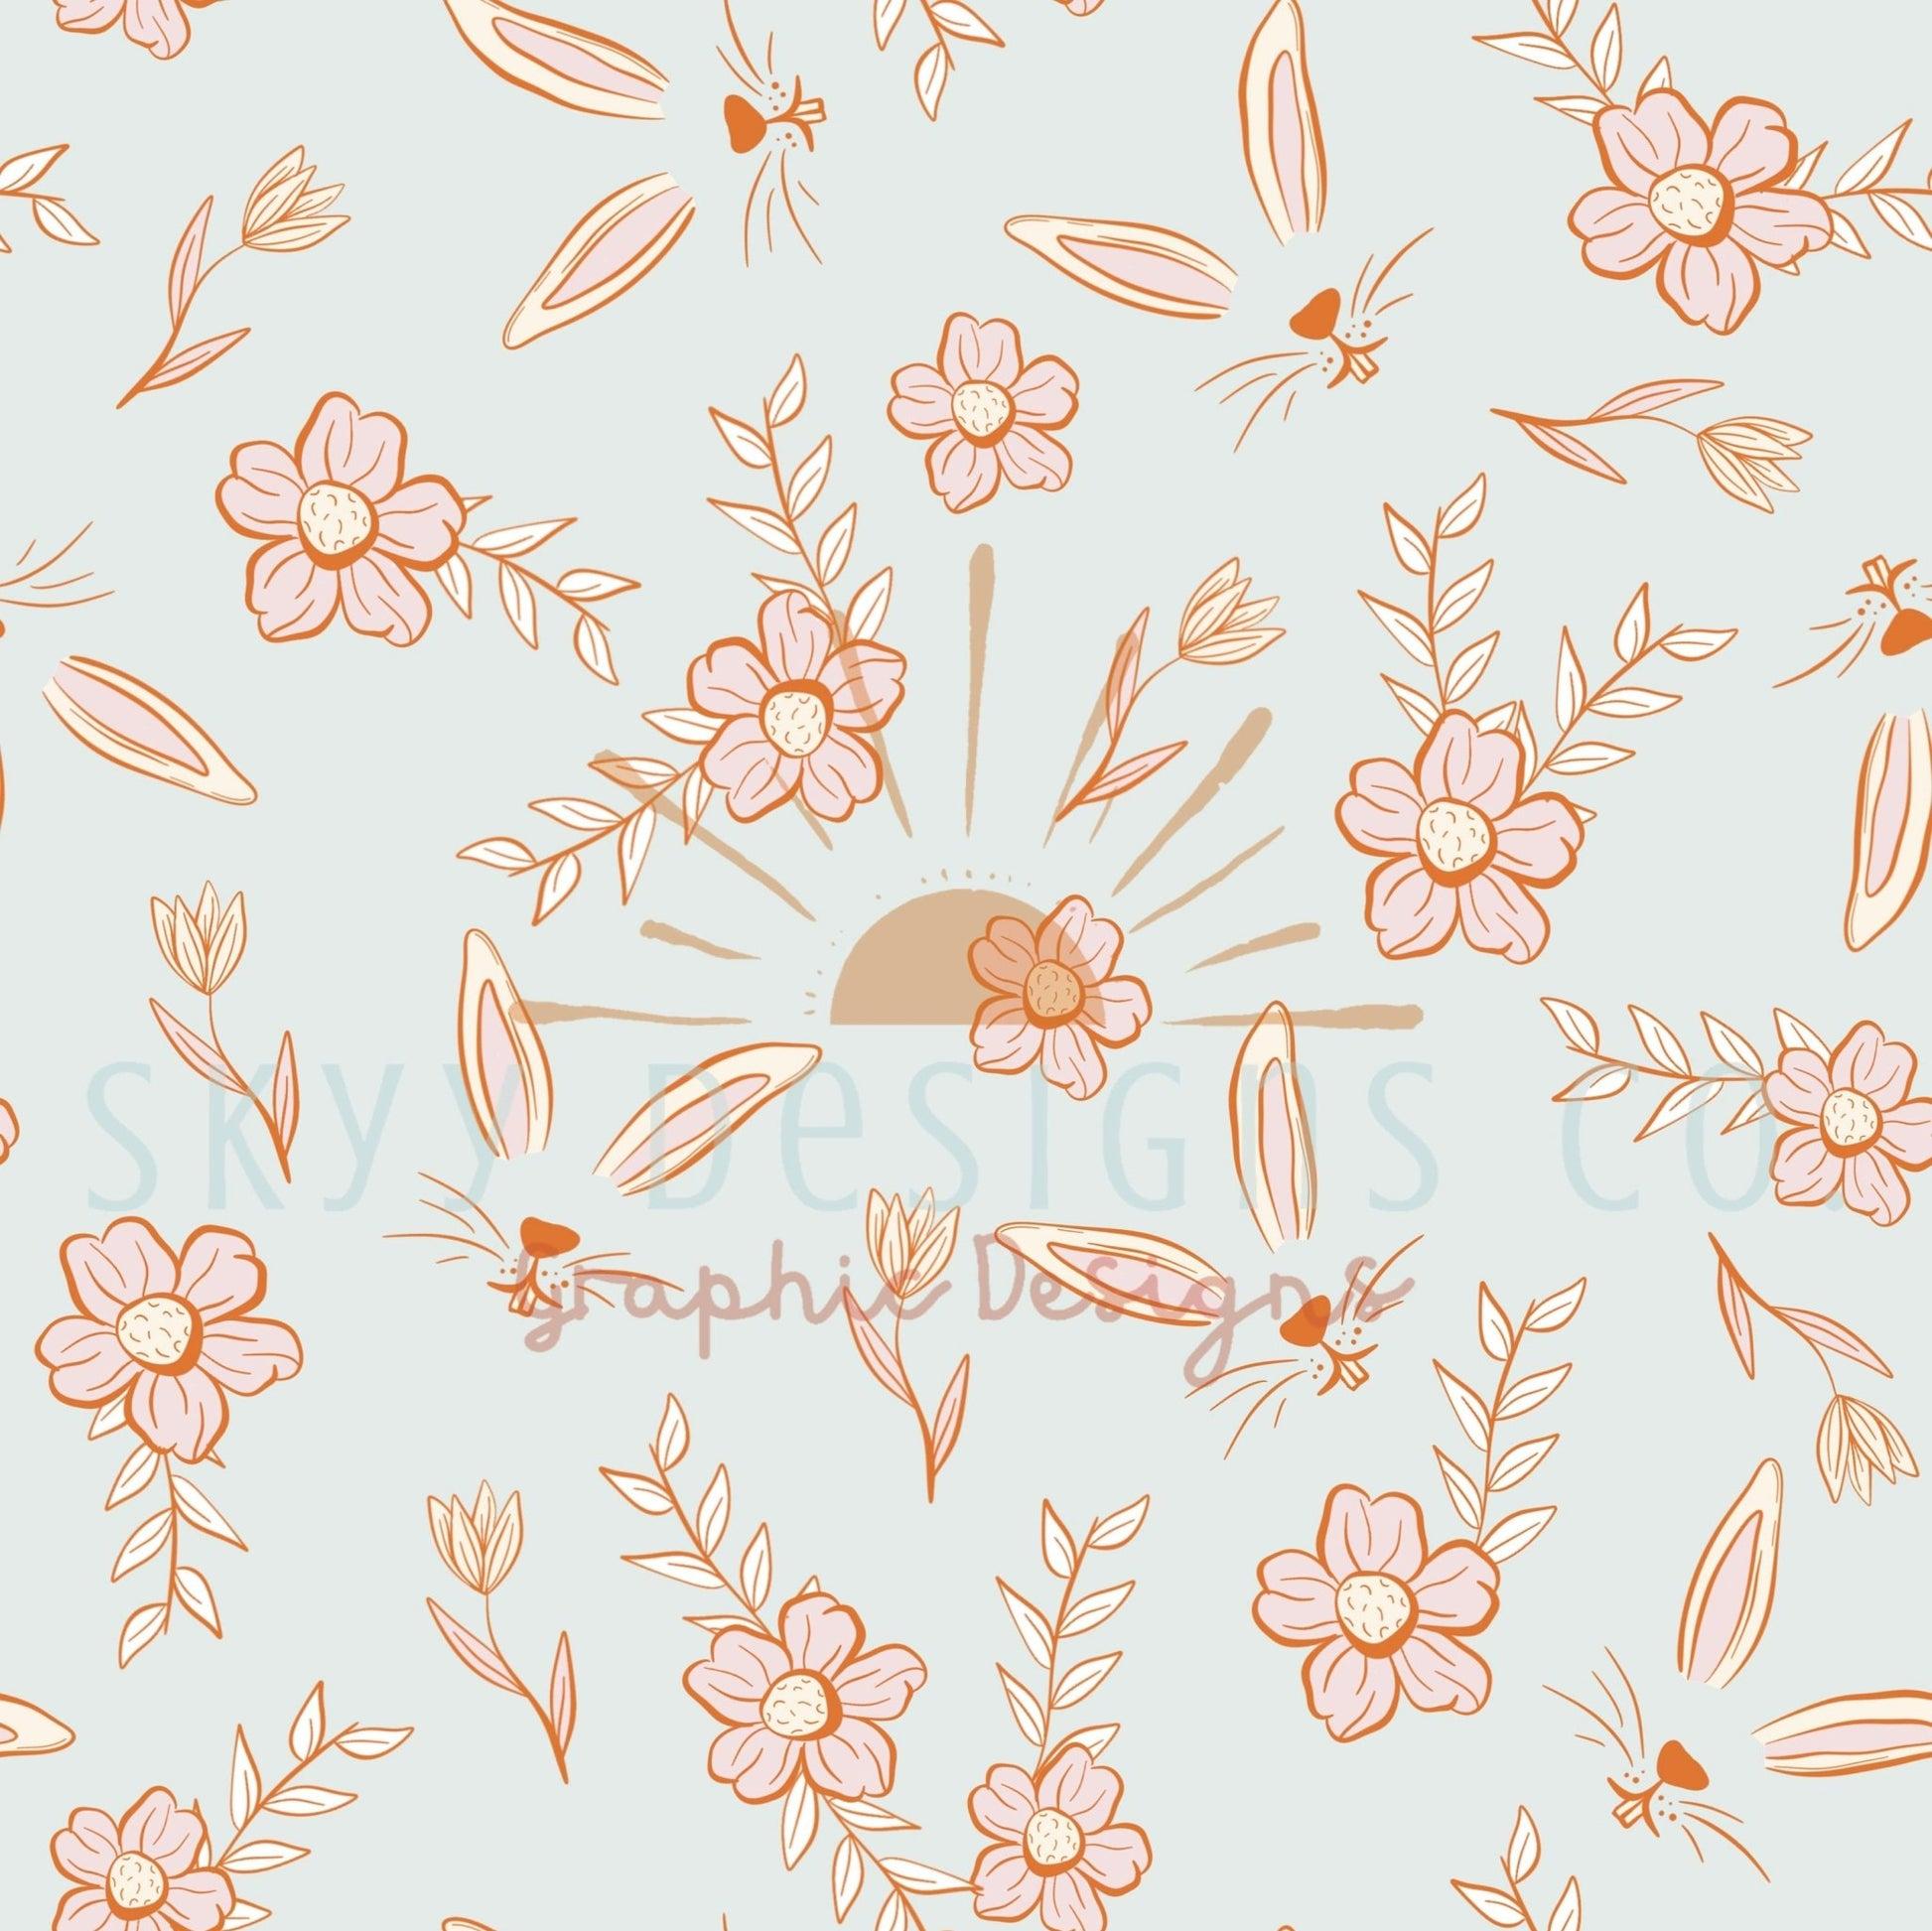 Pastel Bunny Ears Digital Seamless Pattern For Fabrics And Wallpaper